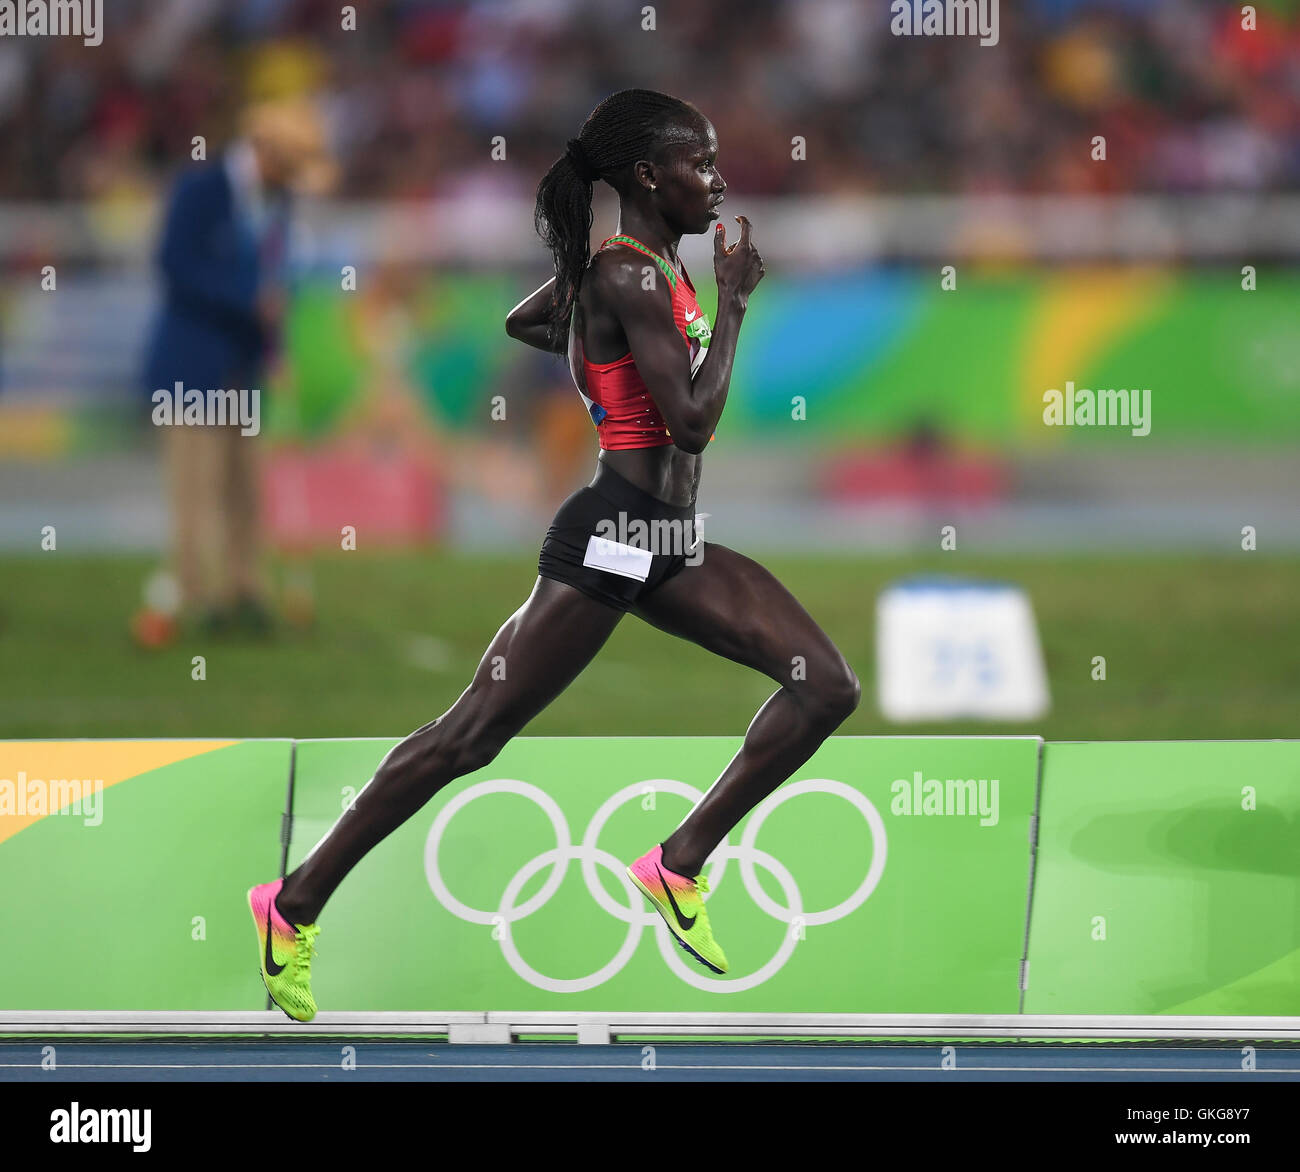 Rio de Janeiro, Brazil. 19th August, 2016. Vivian Cheruiyot of Kenya in the women's 5000m final during the evening session on Day 14 Athletics of the 2016 Rio Olympics at Olympic Stadium on August 19, 2016 in Rio de Janeiro, Brazil. Credit:  Roger Sedres/Alamy Live News Stock Photo